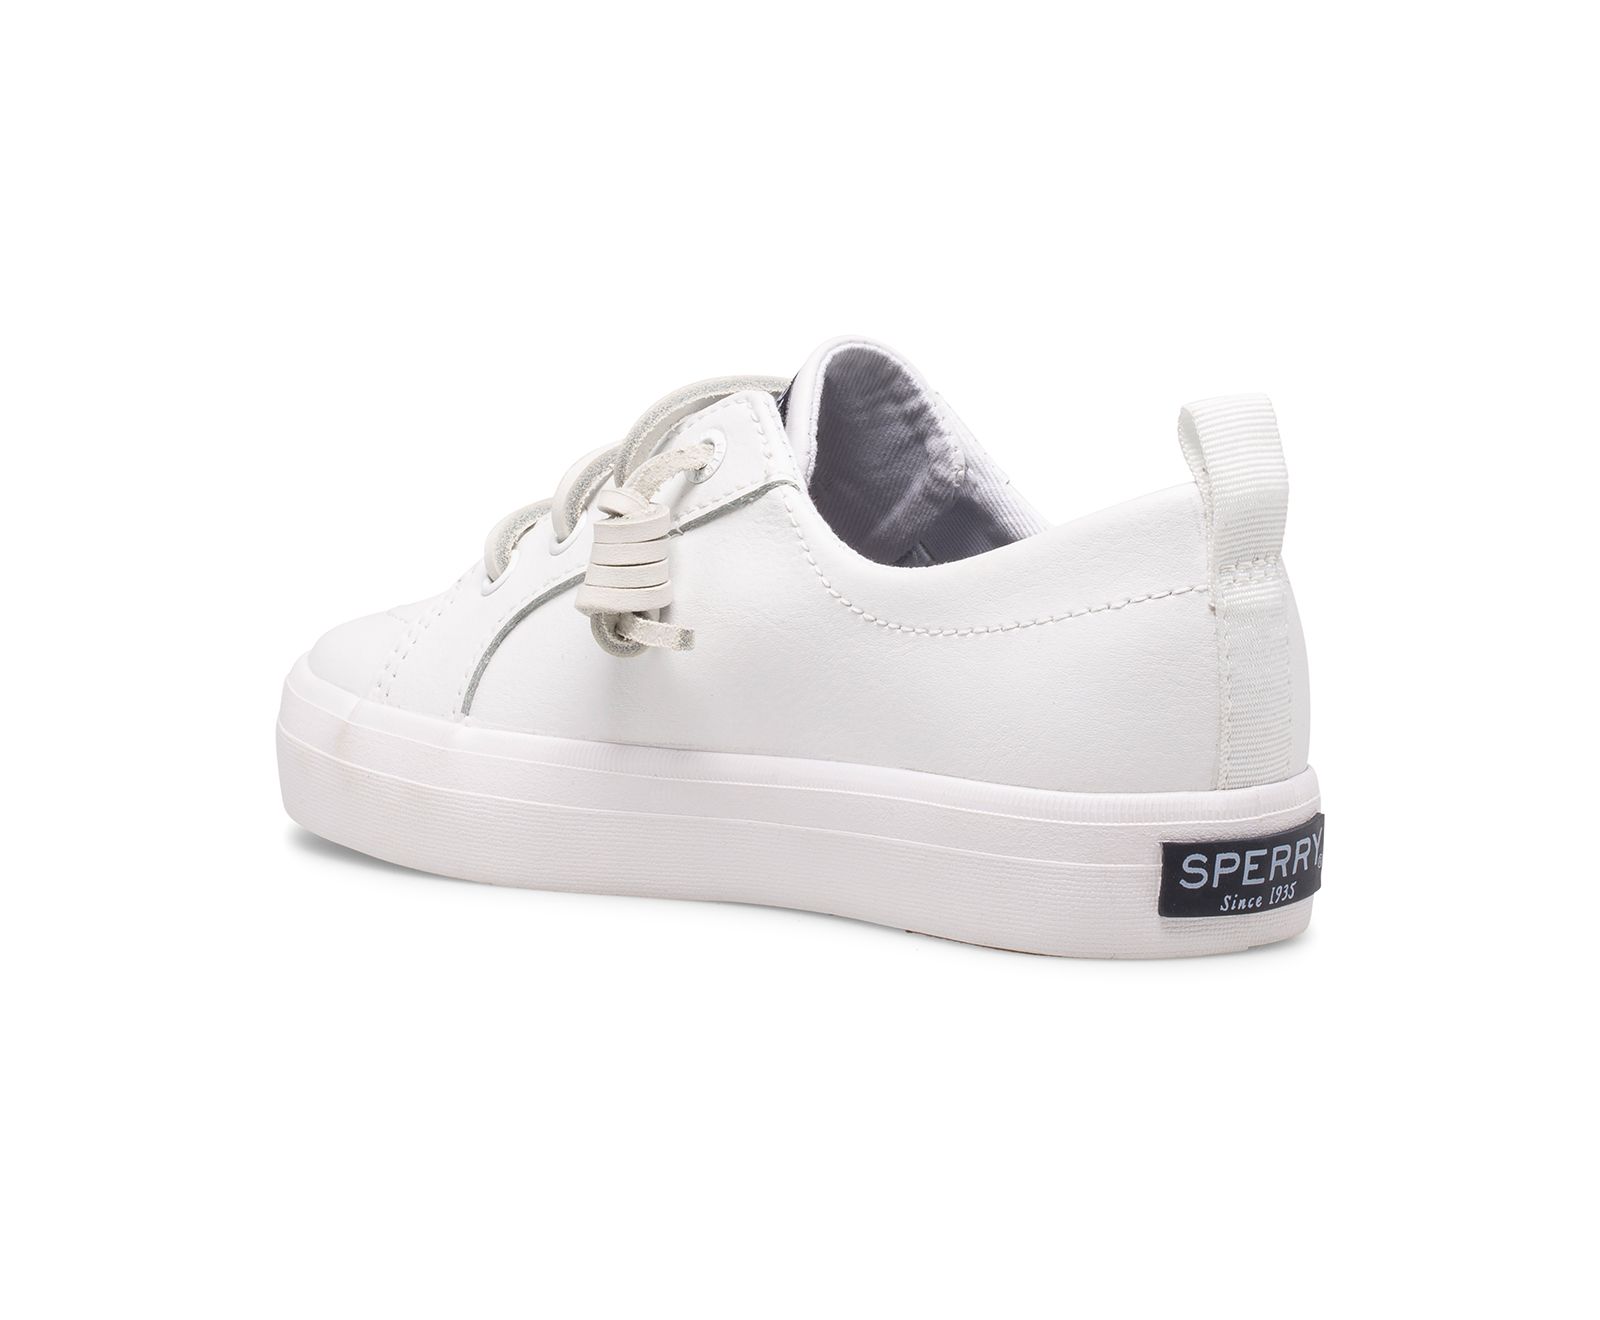 Big Kid's Crest Vibe Sneaker - Girls' Shoes | Sperry